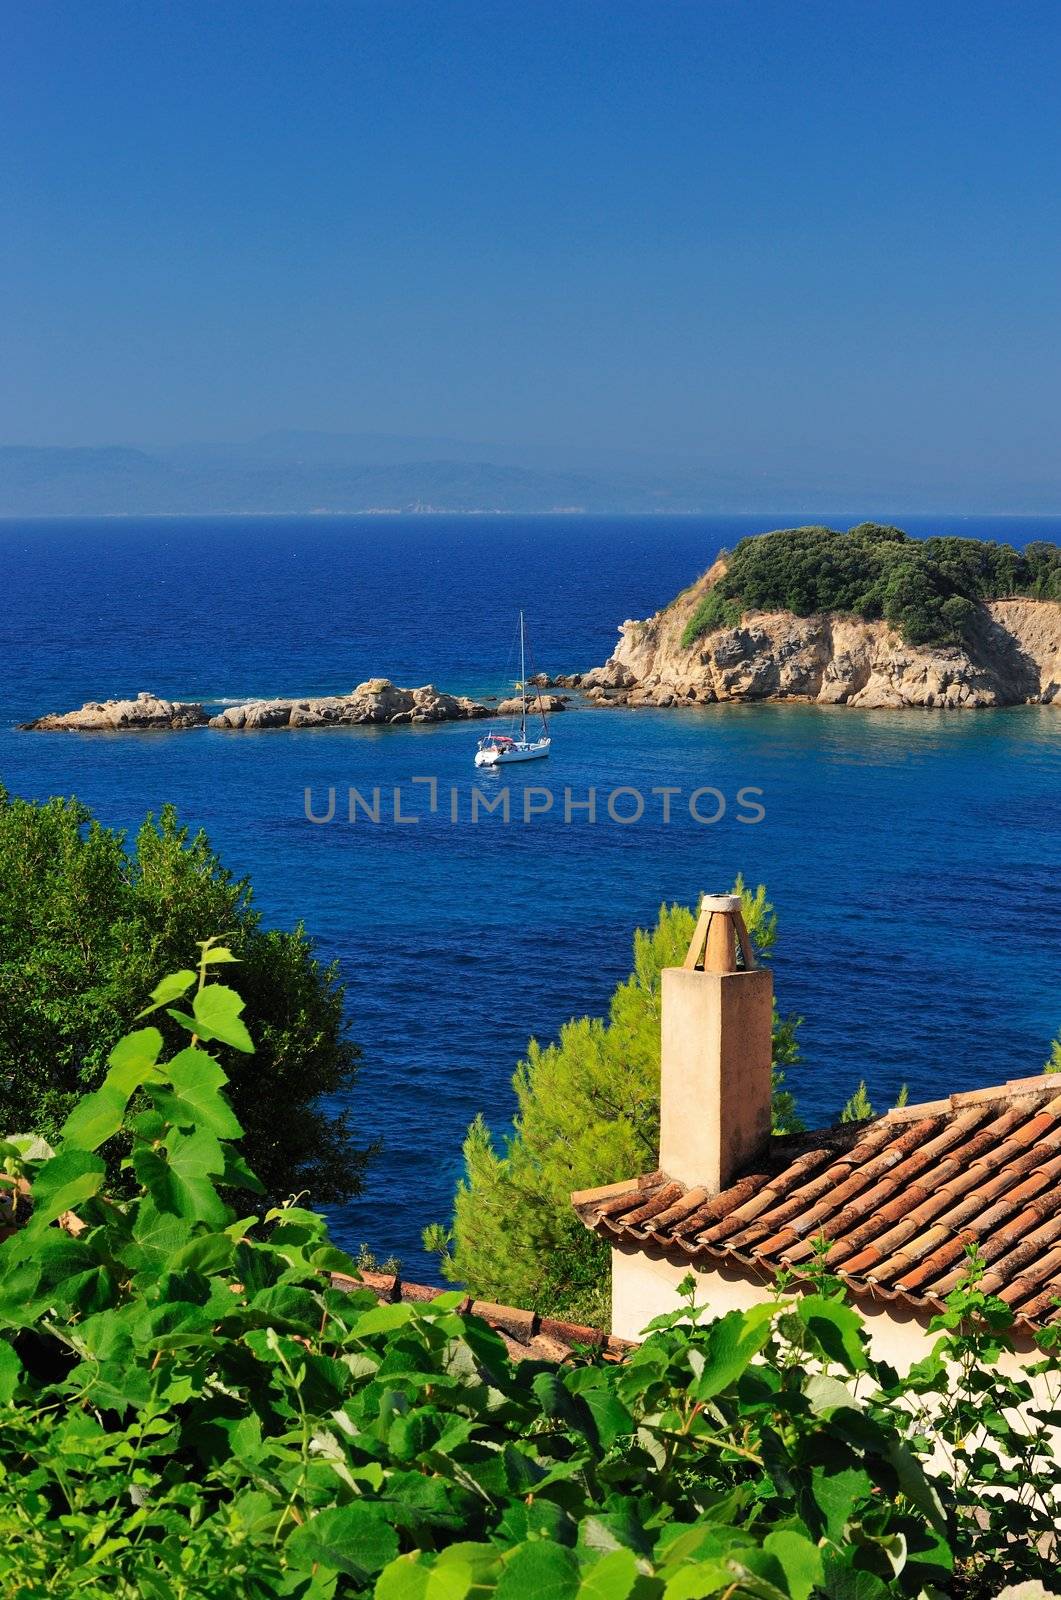 Morning view from a Greek island in the Aegean Sea, which includes part of roofed house, a small island, an anchored sailyacht. Room for text on top.